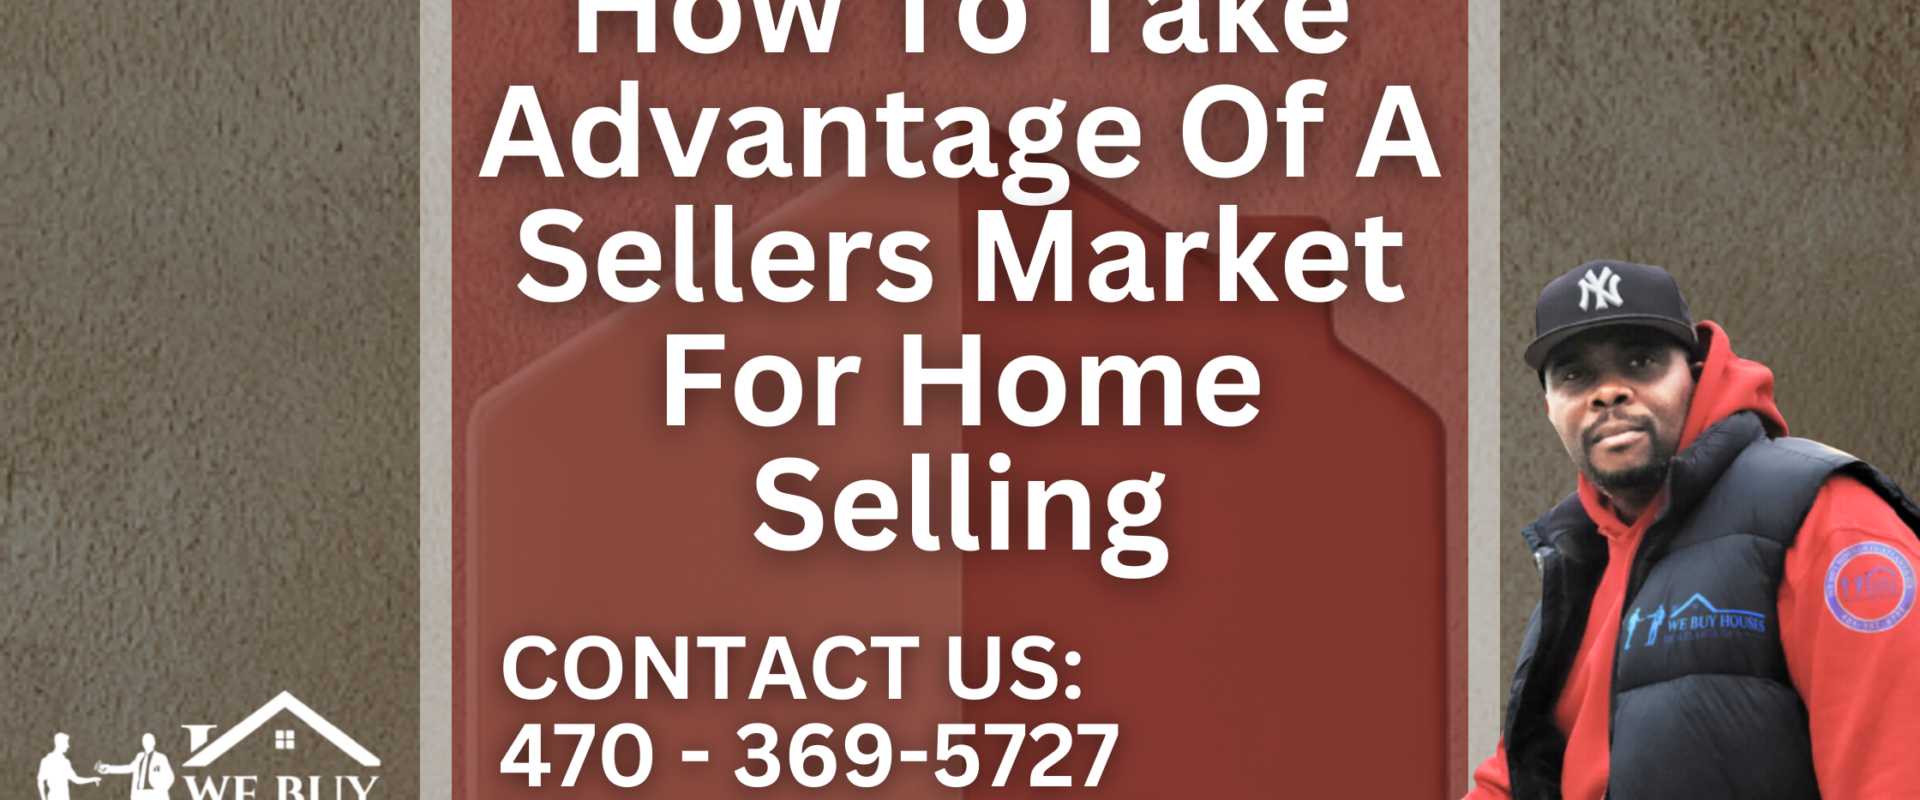 How To Take Advantage Of A Sellers Market For Home Selling